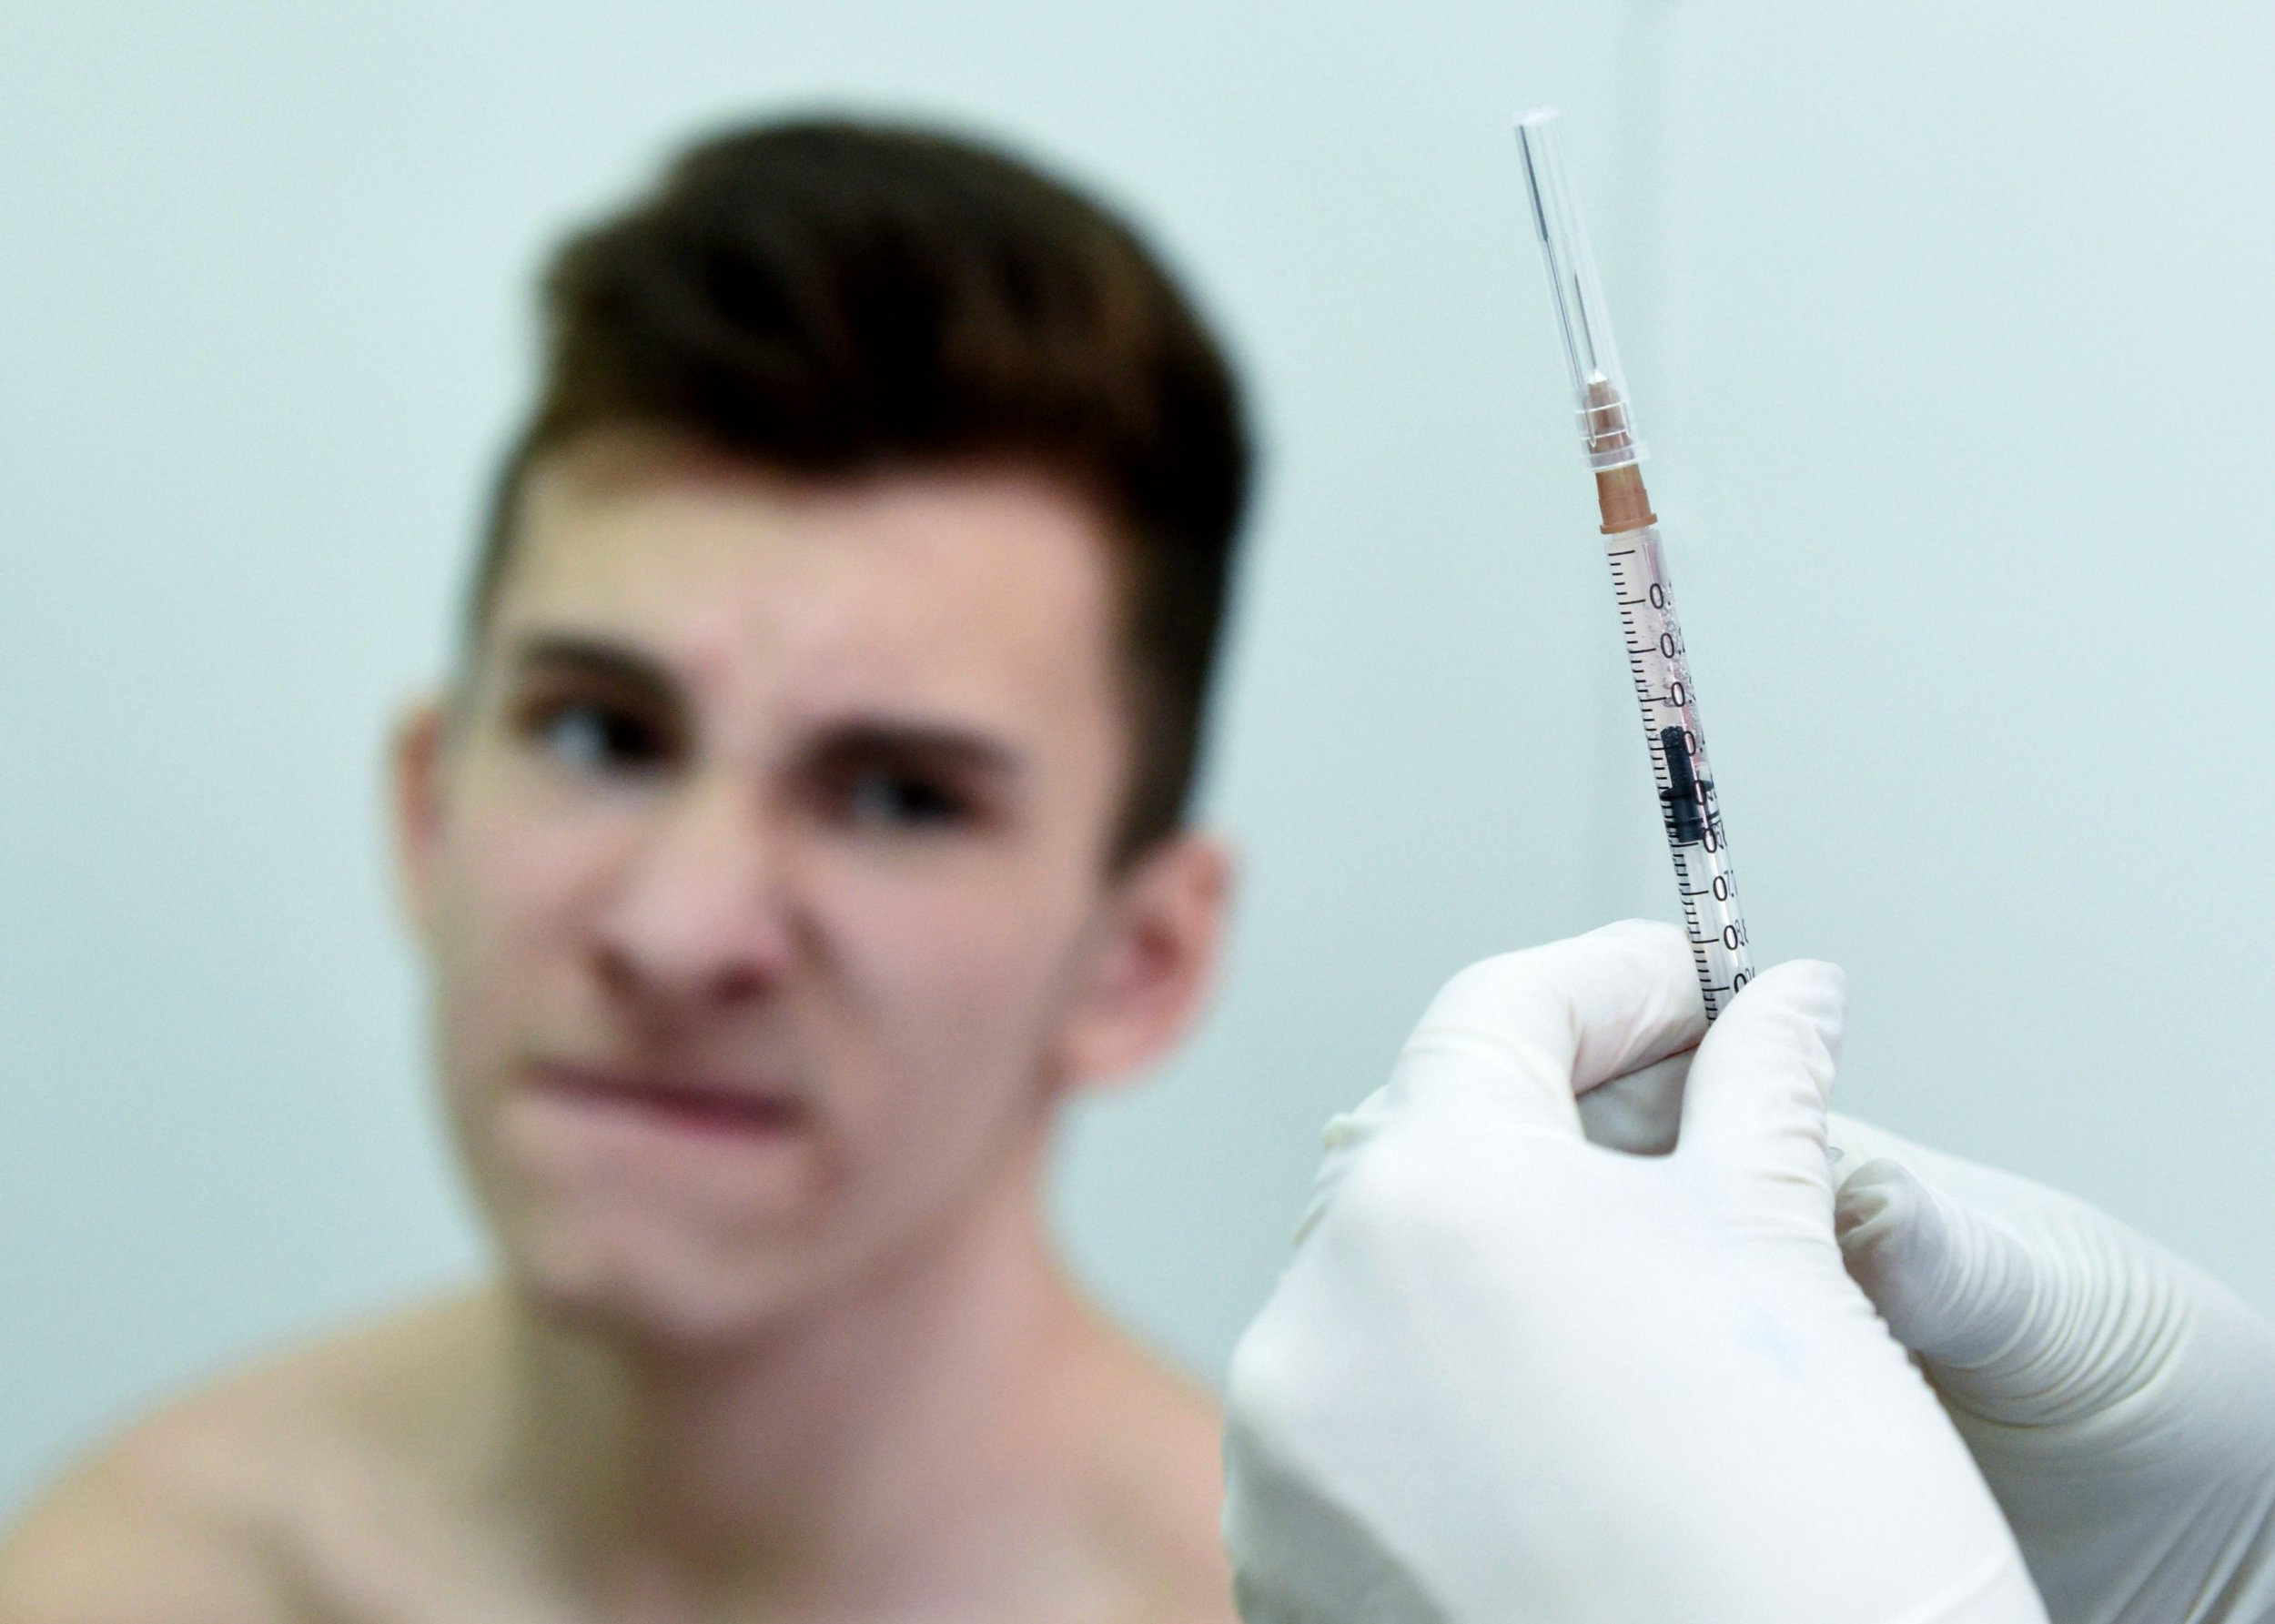 rockland county state of emergency measles outbreak